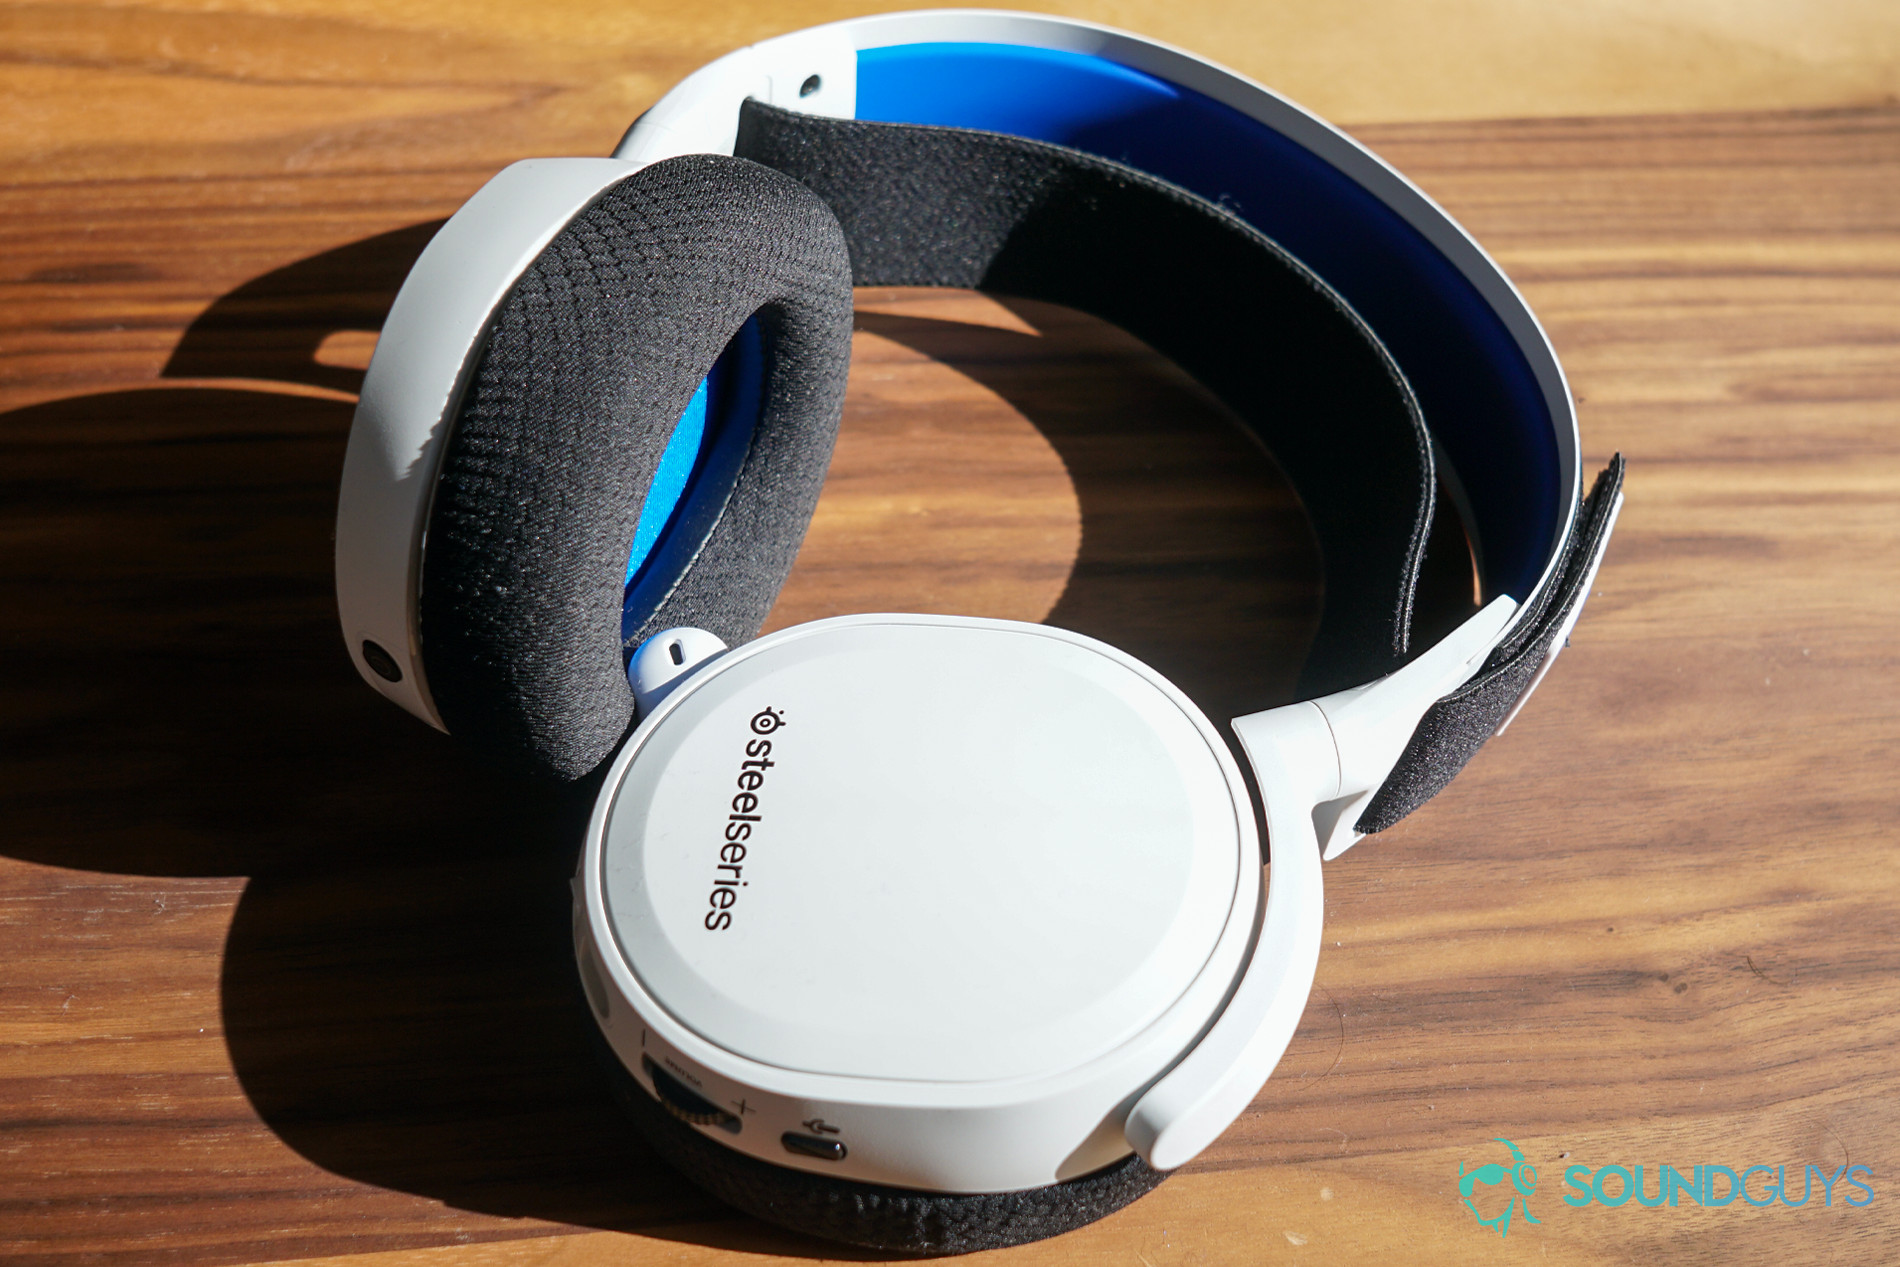 The SteelSeries Arctis 7P gaming headset lays on a wooden table with one headphone rotated flat to the surface.